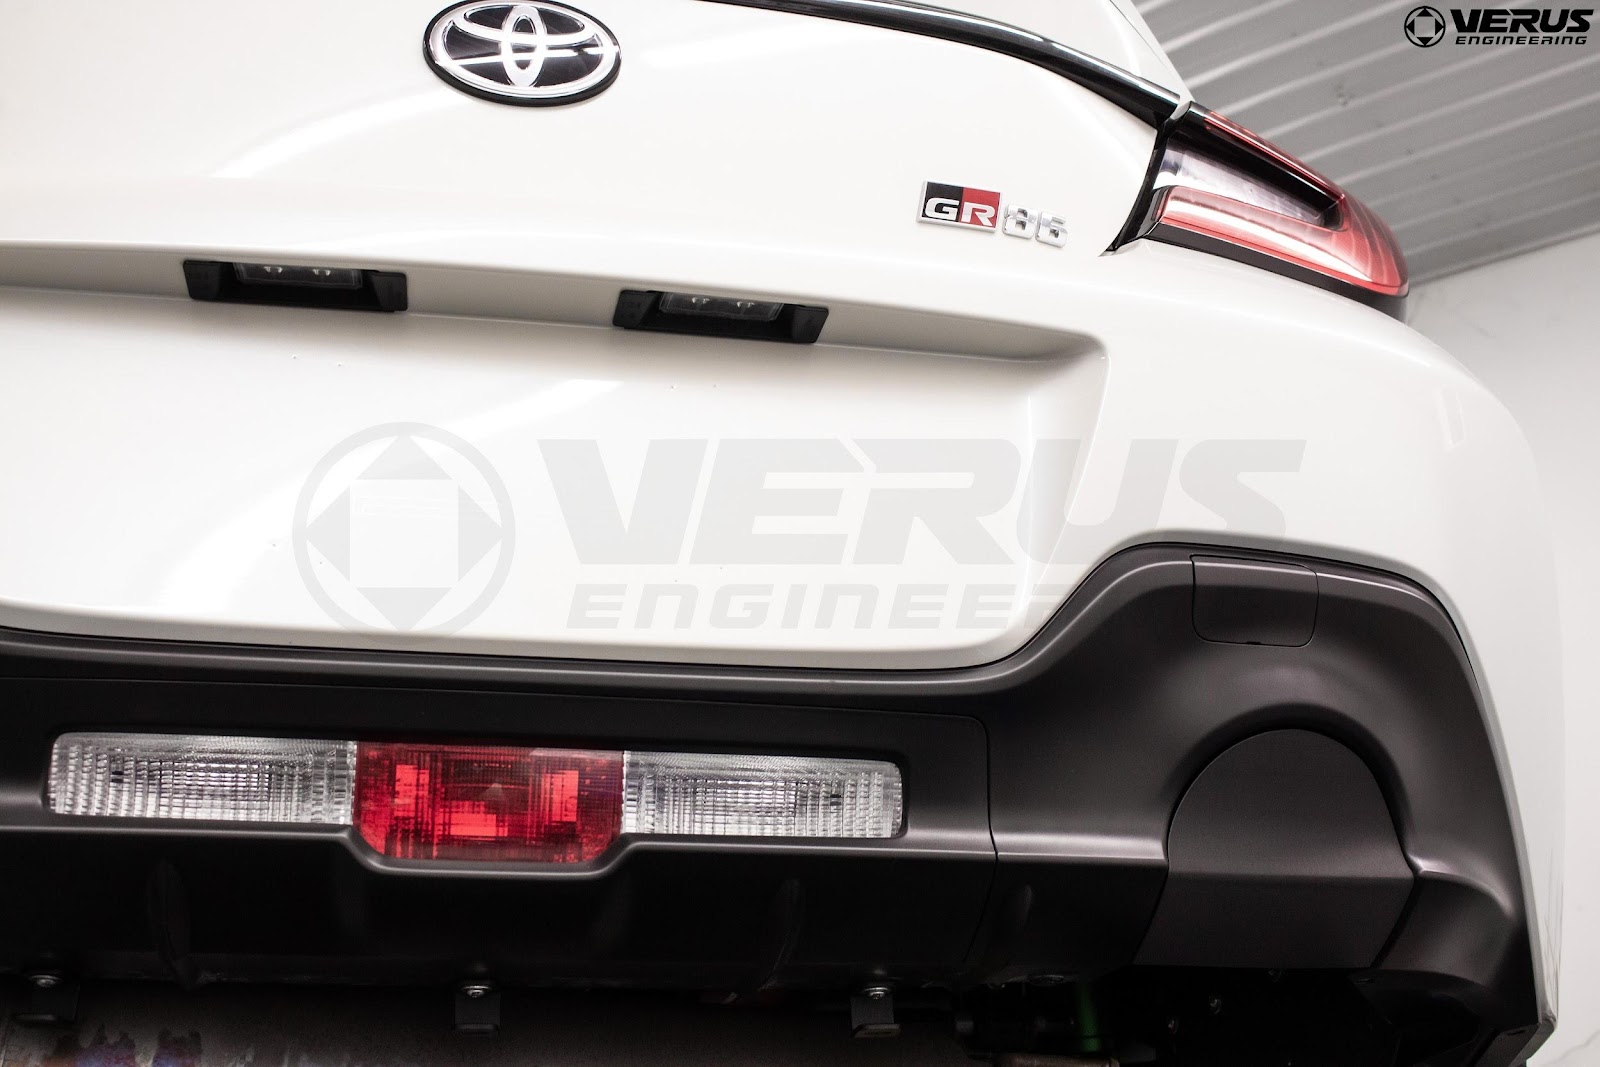 Exhaust opening of a Toyota GR86 is covered with a 3D-printed part made of carbon nylon material